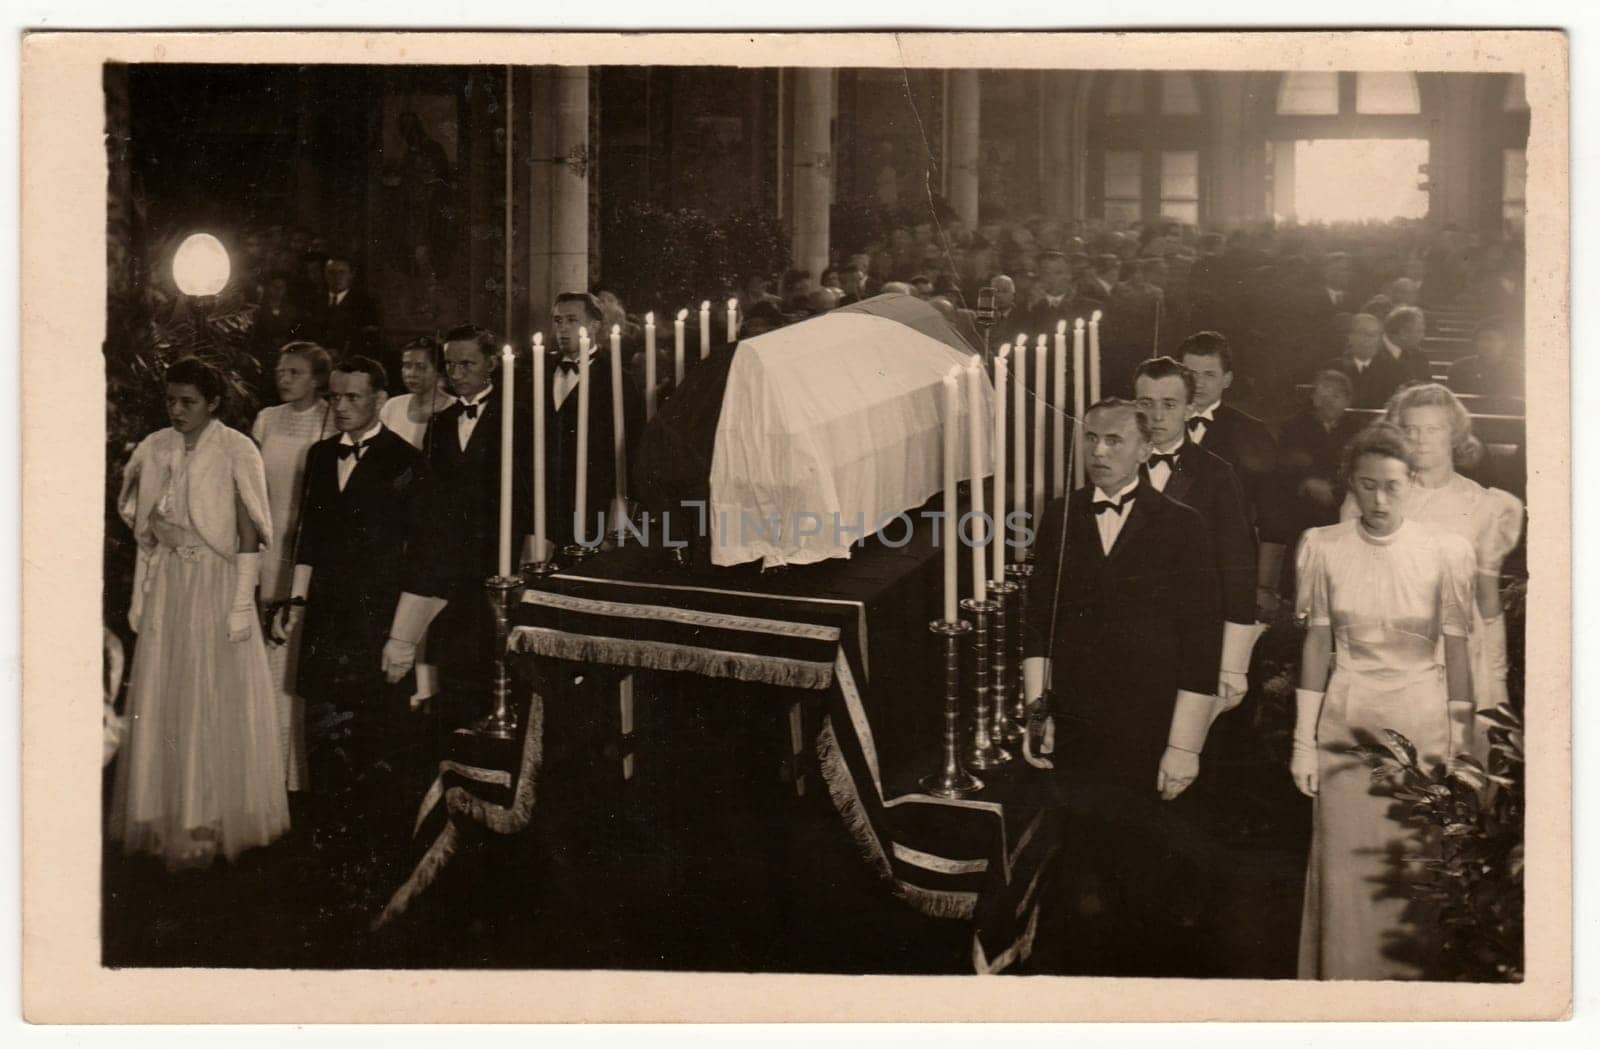 Vintage photo shows the funeral of Karel Hynek Macha - famous Czech poet. Retro black and white photography. by roman_nerud